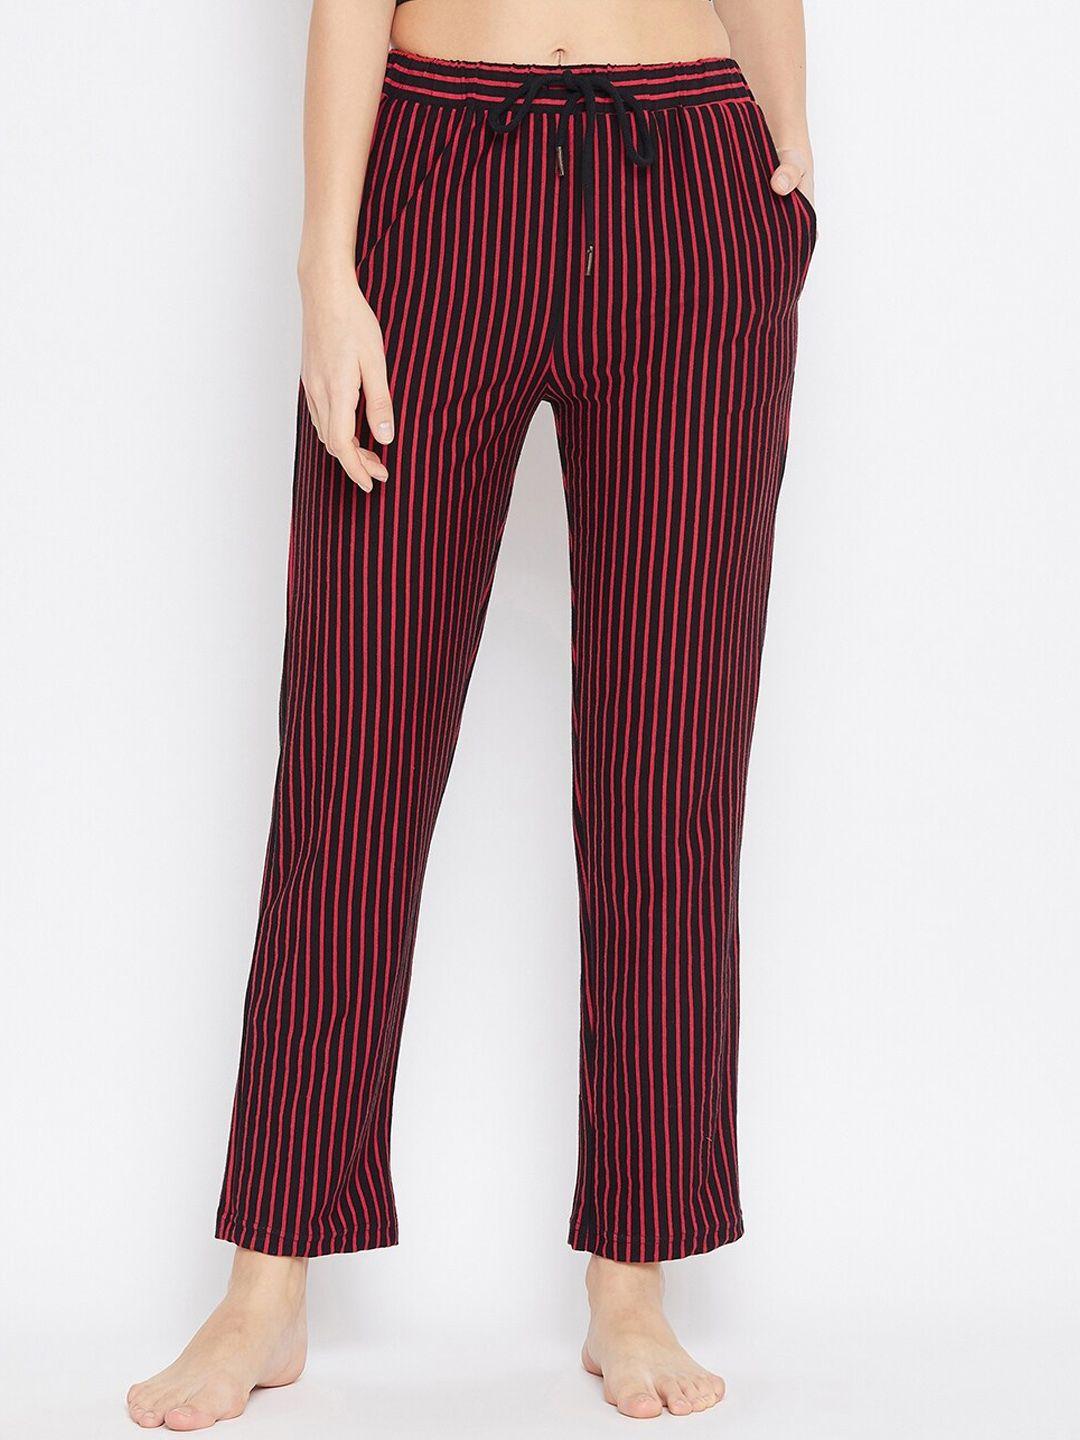 hypernation woman red and black striped lounge pant